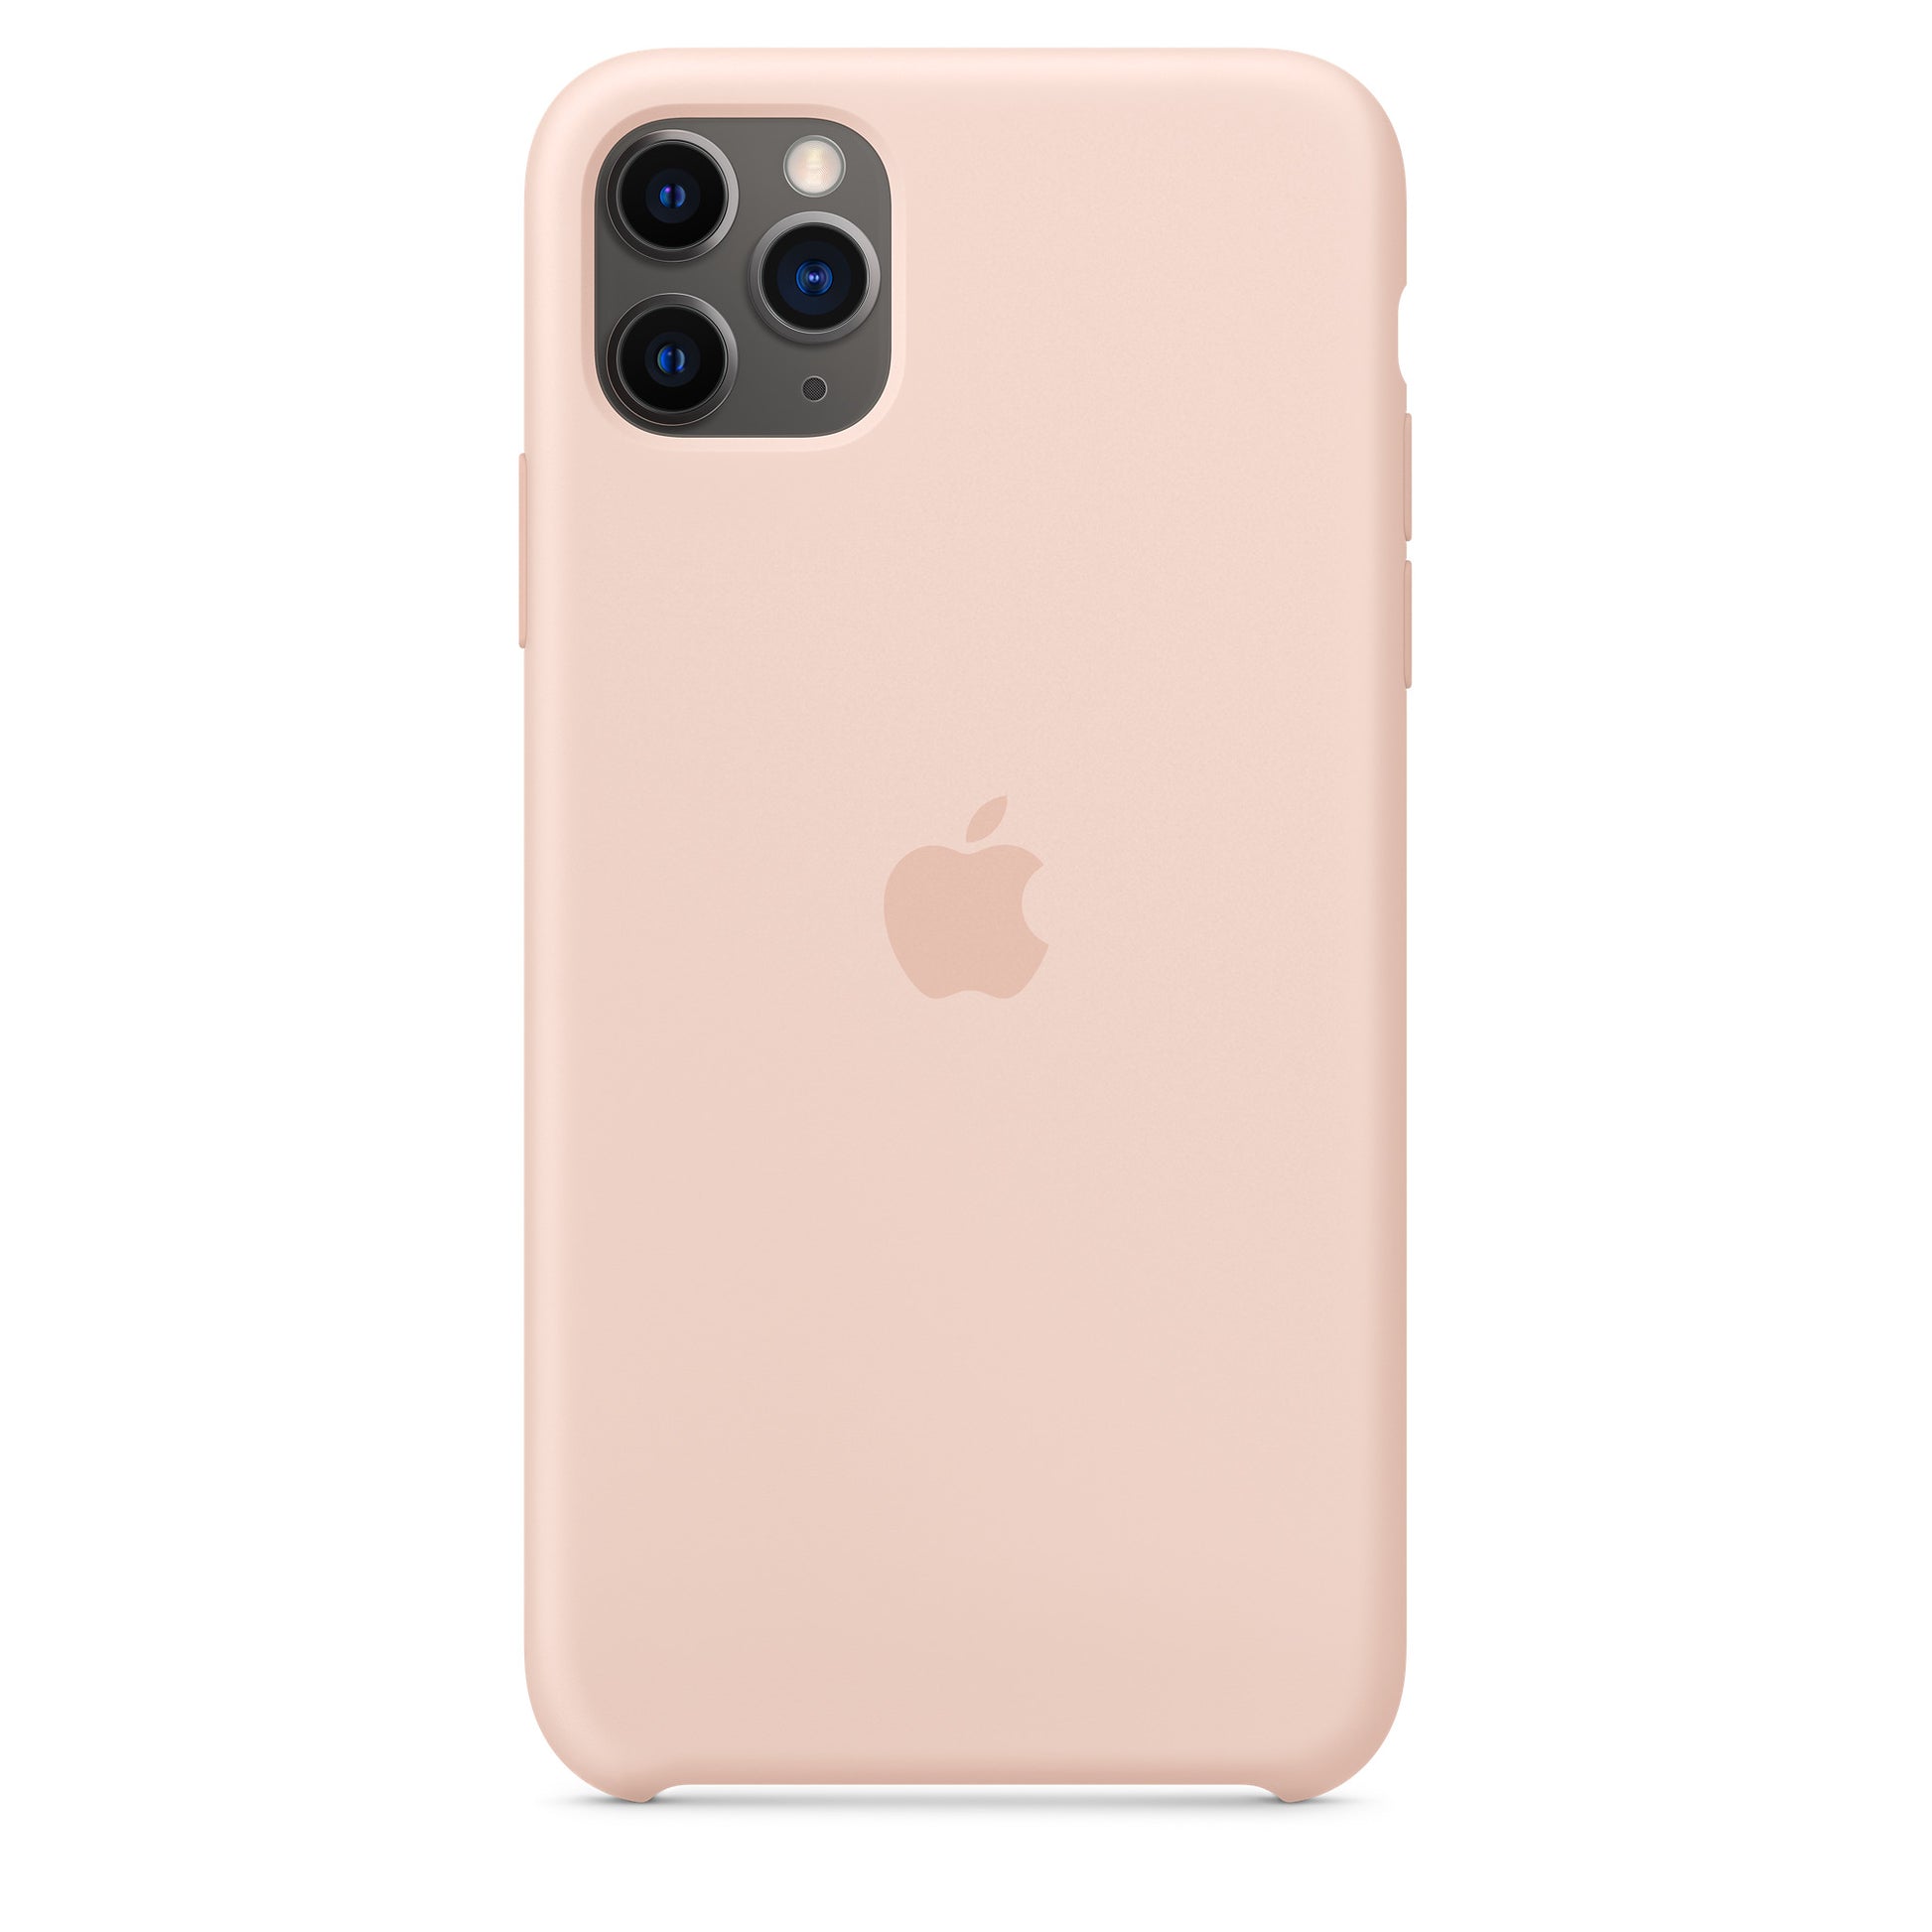 Apple iPhone 11 Pro Max Silicone Case Pink Sand Pink Sand New - Sealed